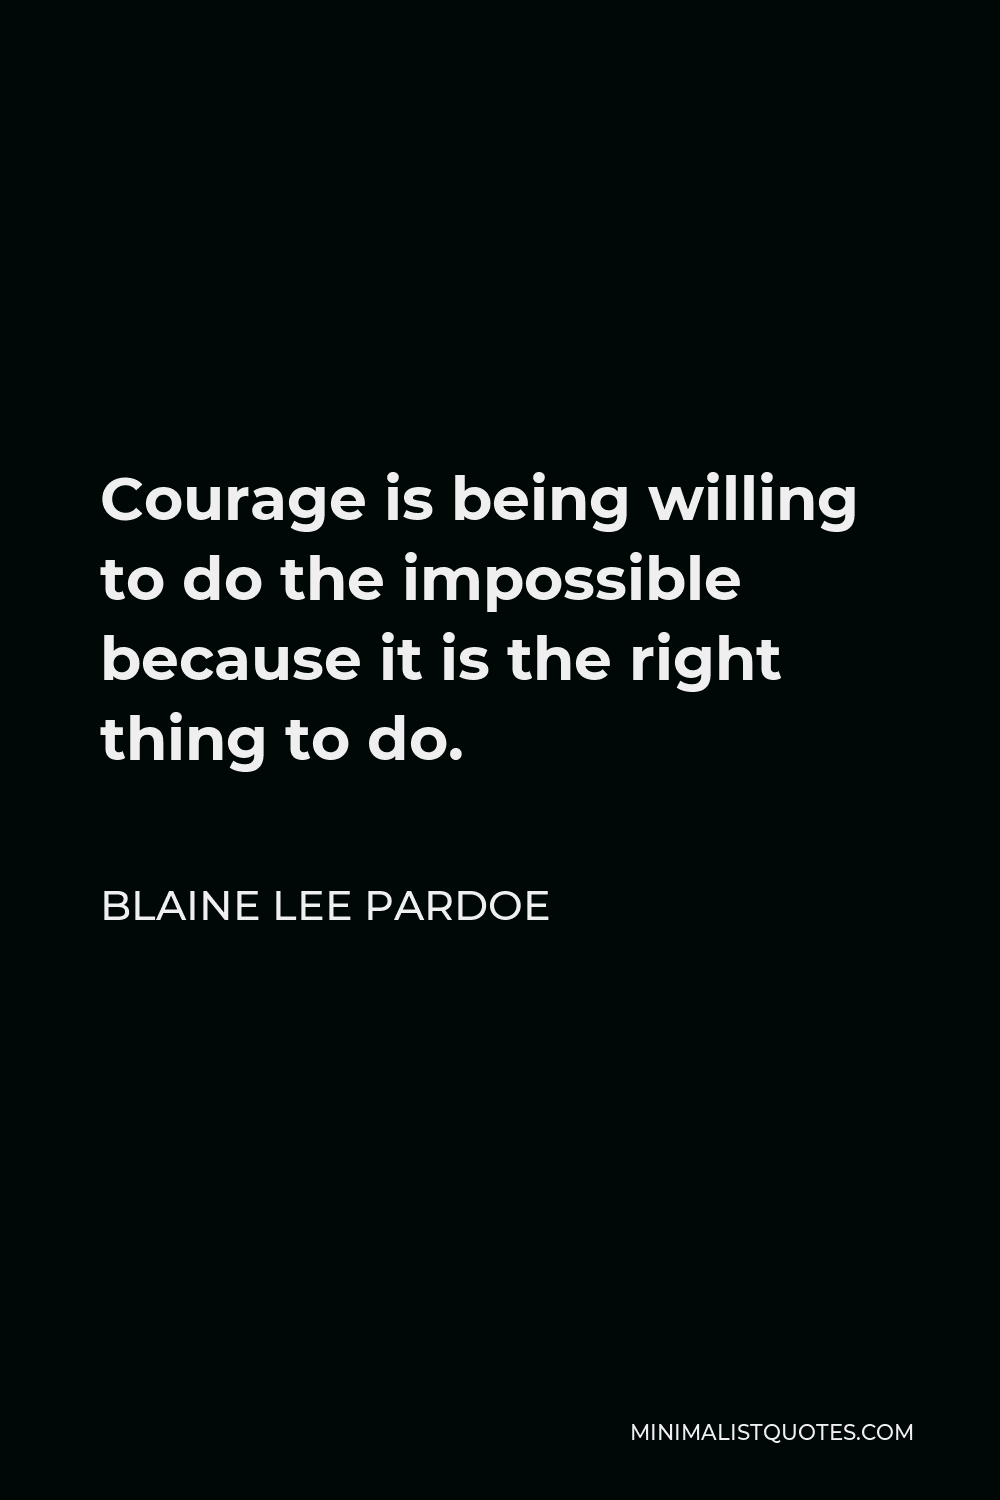 Blaine Lee Pardoe Quote - Courage is being willing to do the impossible because it is the right thing to do.